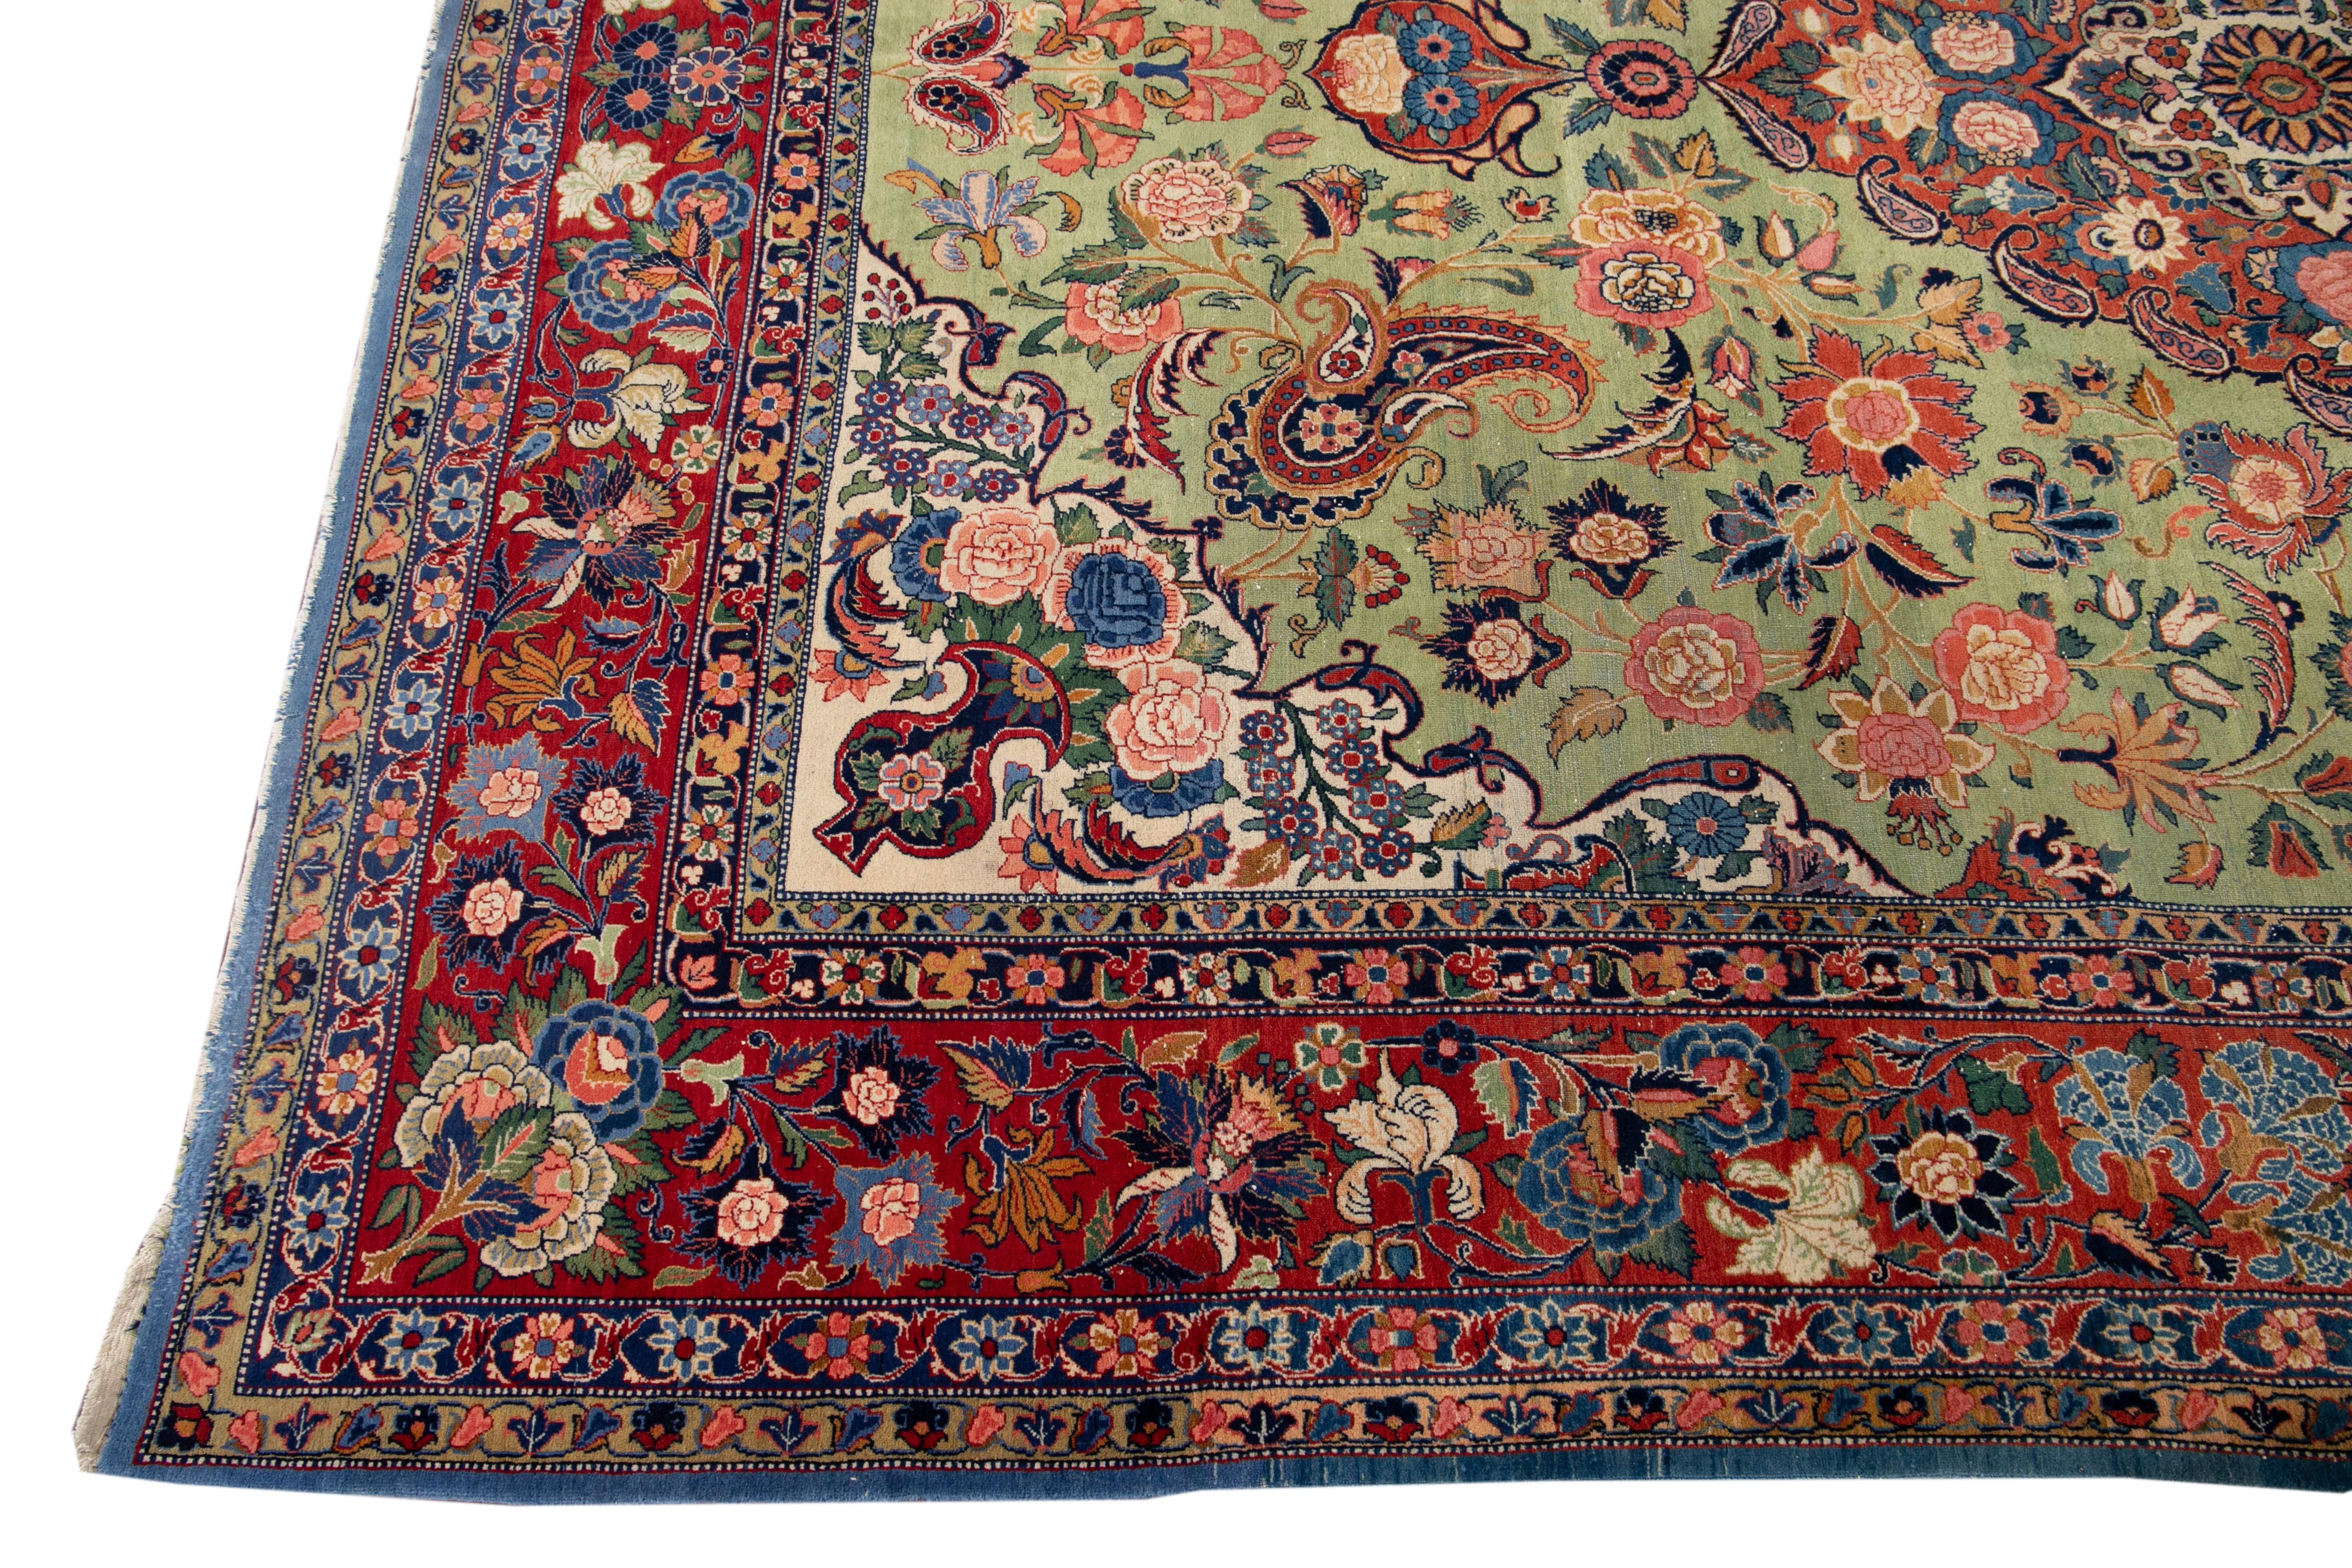 Green Antique Persian Tabriz Handmade Wool Rug In Excellent Condition For Sale In Norwalk, CT